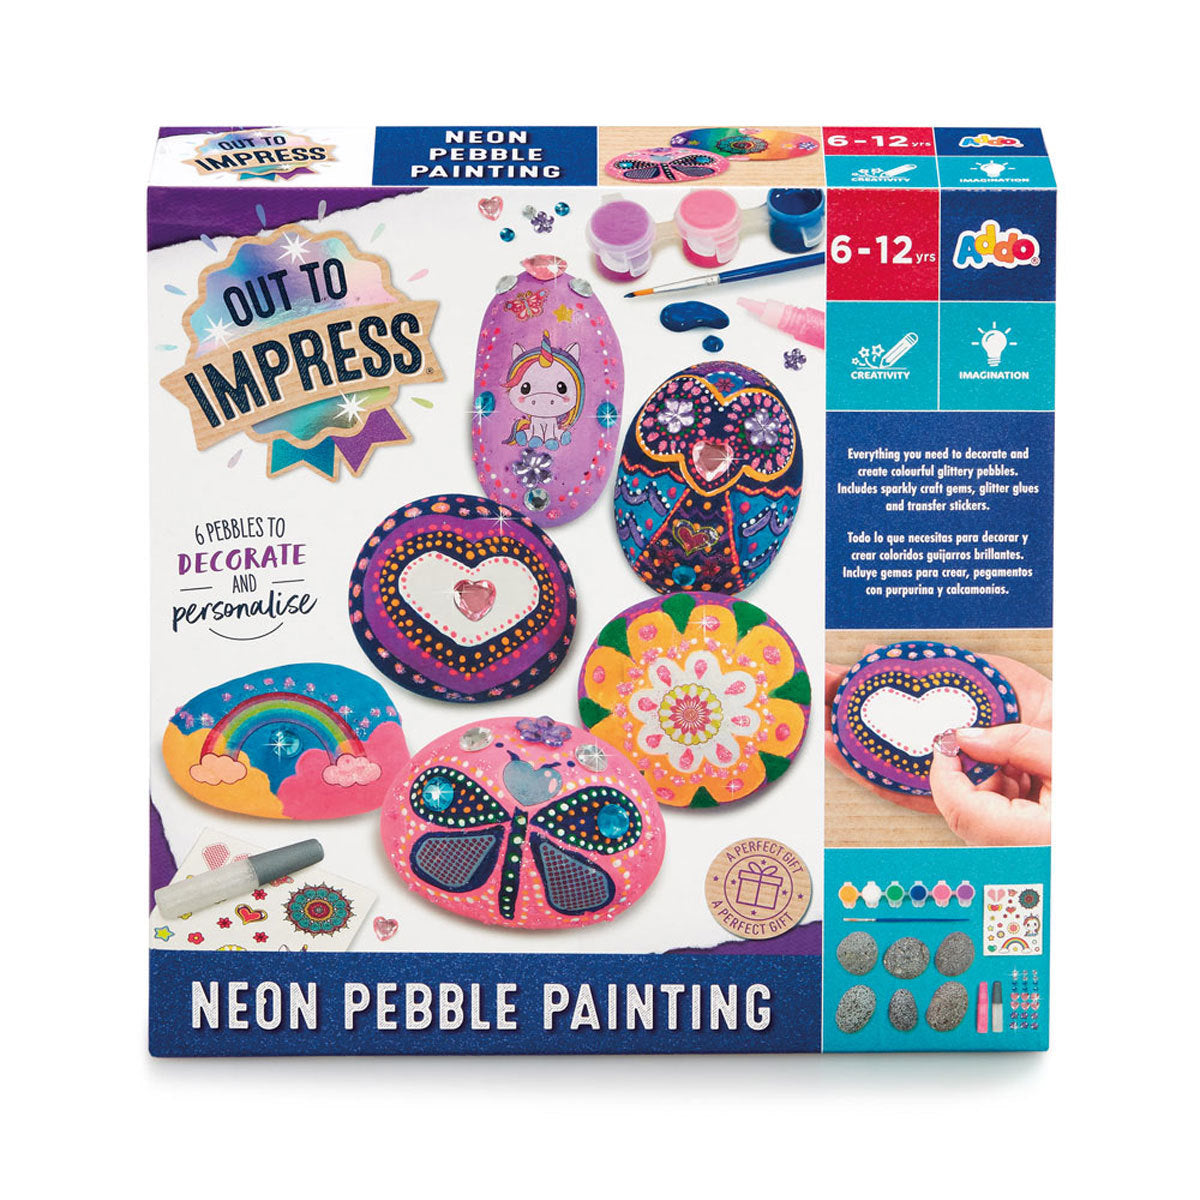 Out to Impress Neon Pebble Paint